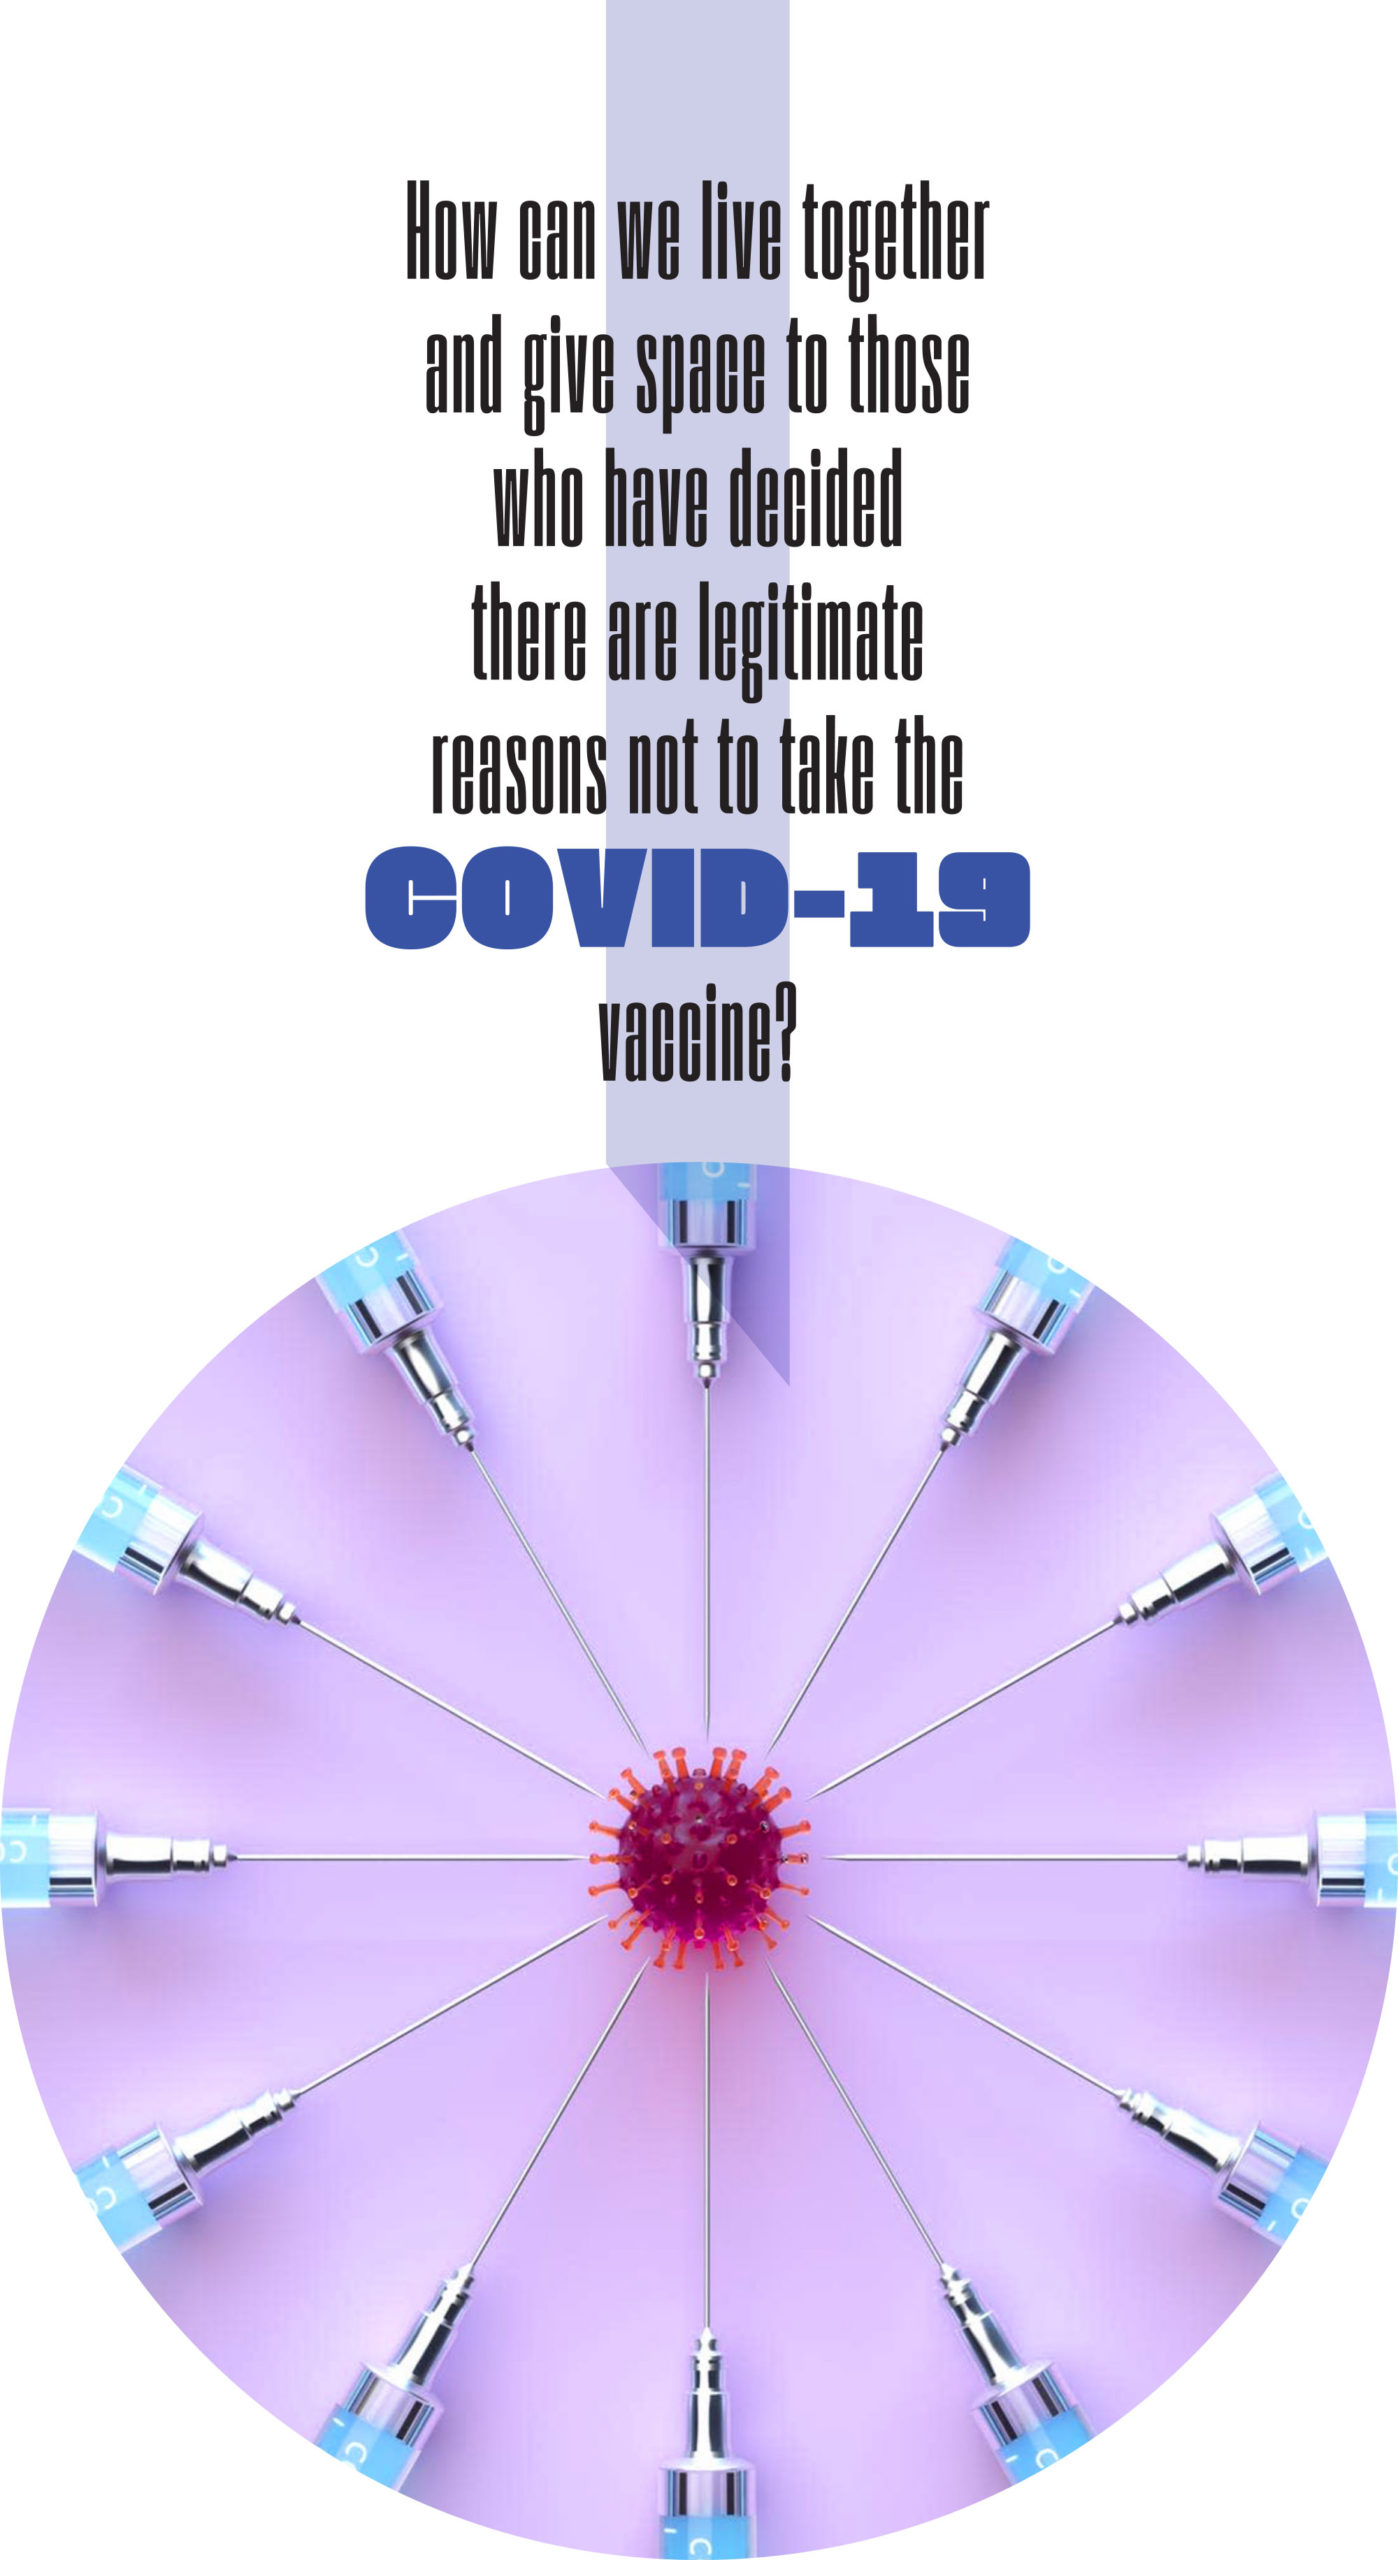 How can we live together and give space to those who have decided there are legitimate reasons not to take the COVID-19 vaccine?